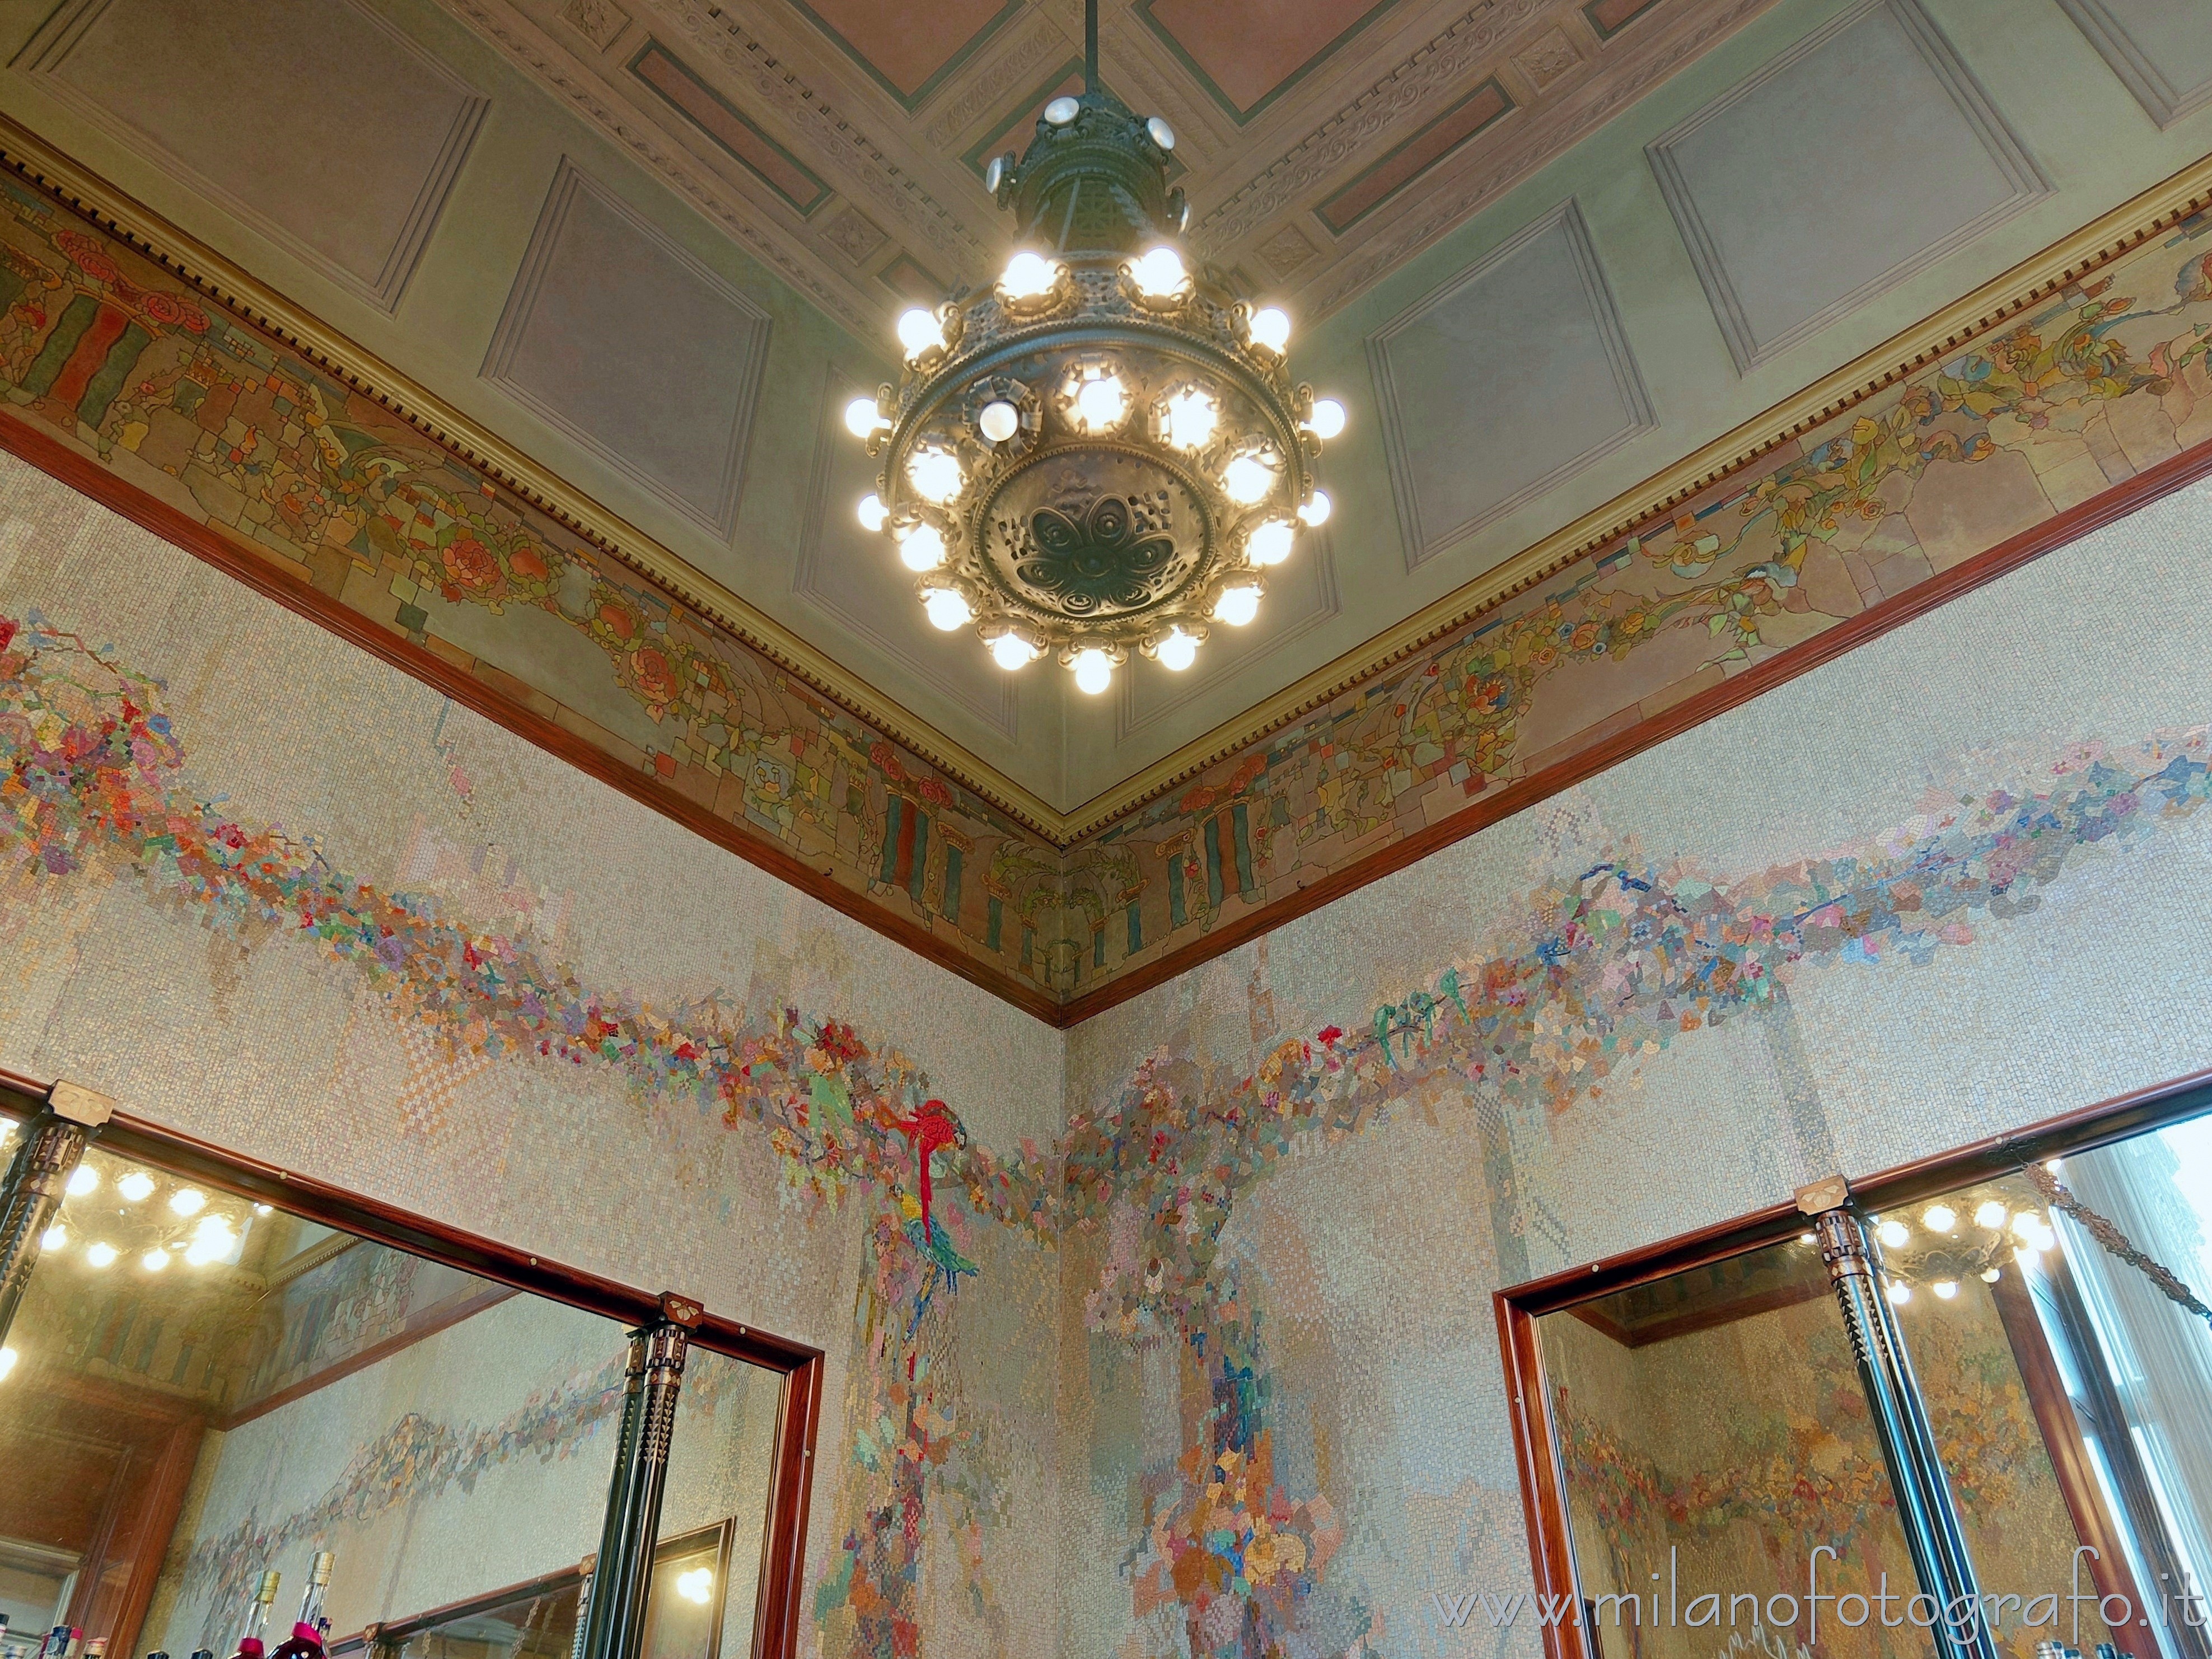 Milan (Italy): Walls of the Camparino Bar decorated with art nouveau mosaics  by Angelo d'Andrea - Milan (Italy)